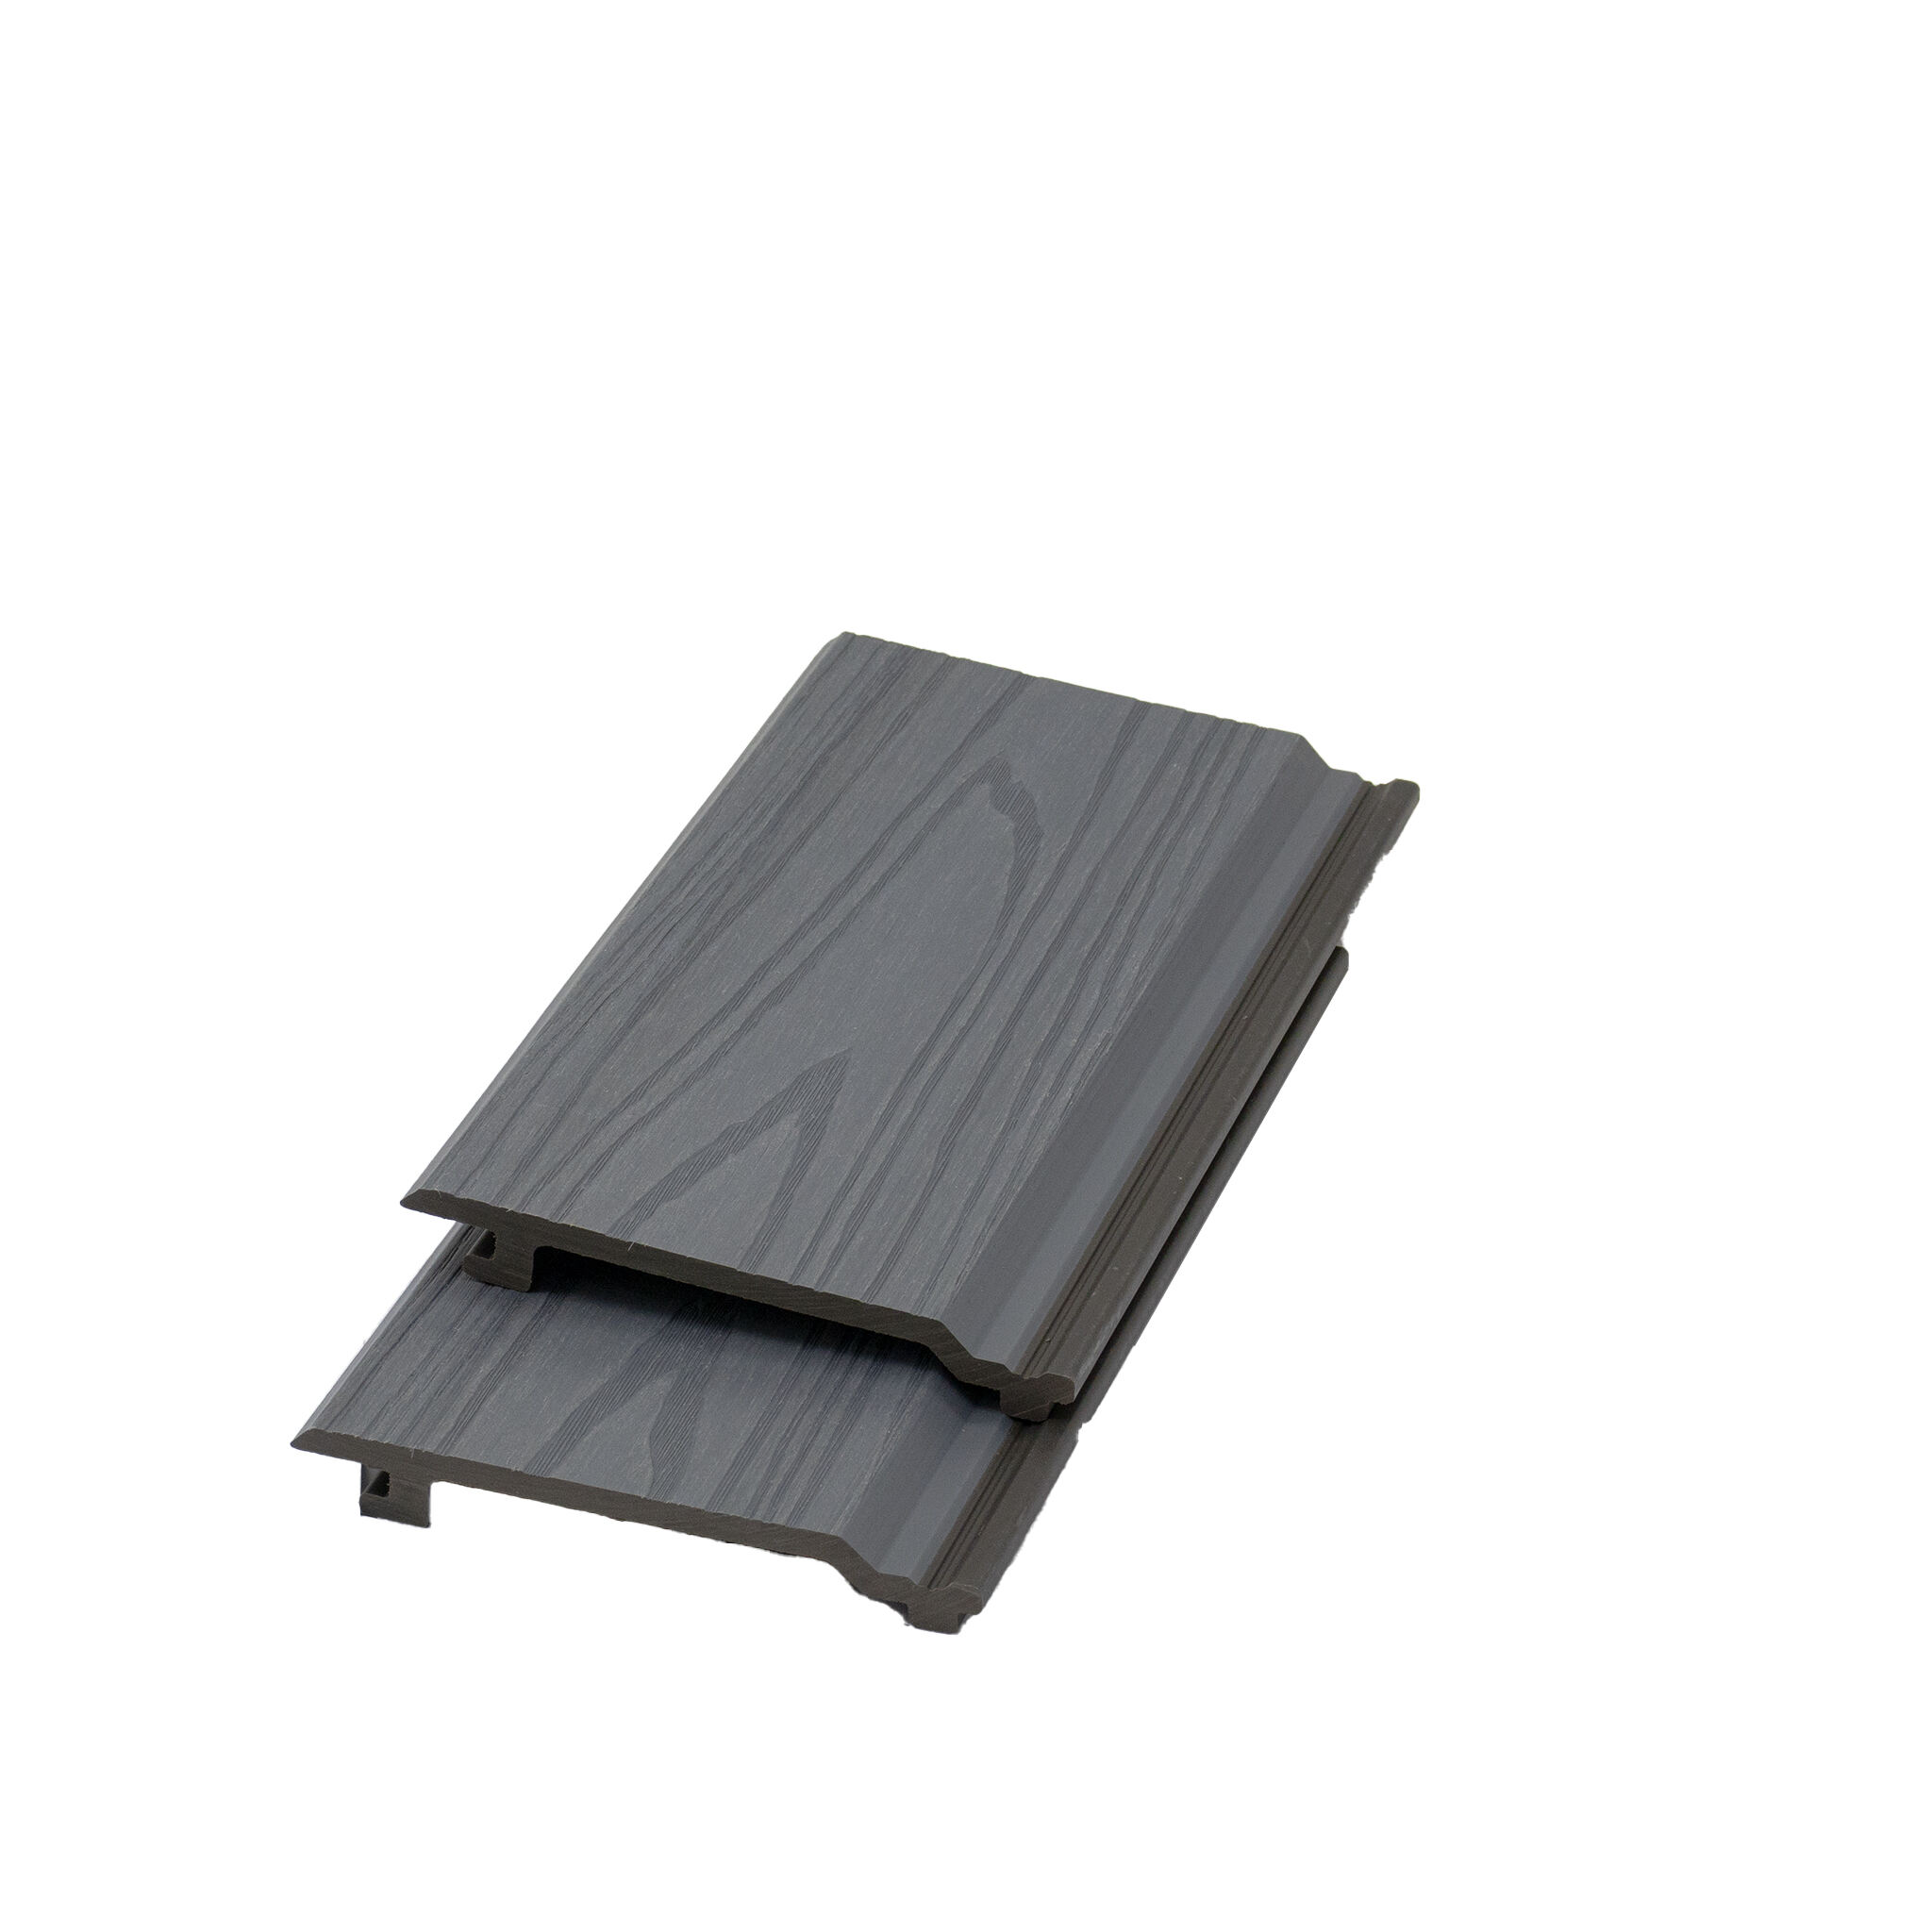 Co-Extrusion Composite Wall Cladding 160K21-Advanced Technology-Outdoor Composite Cladding